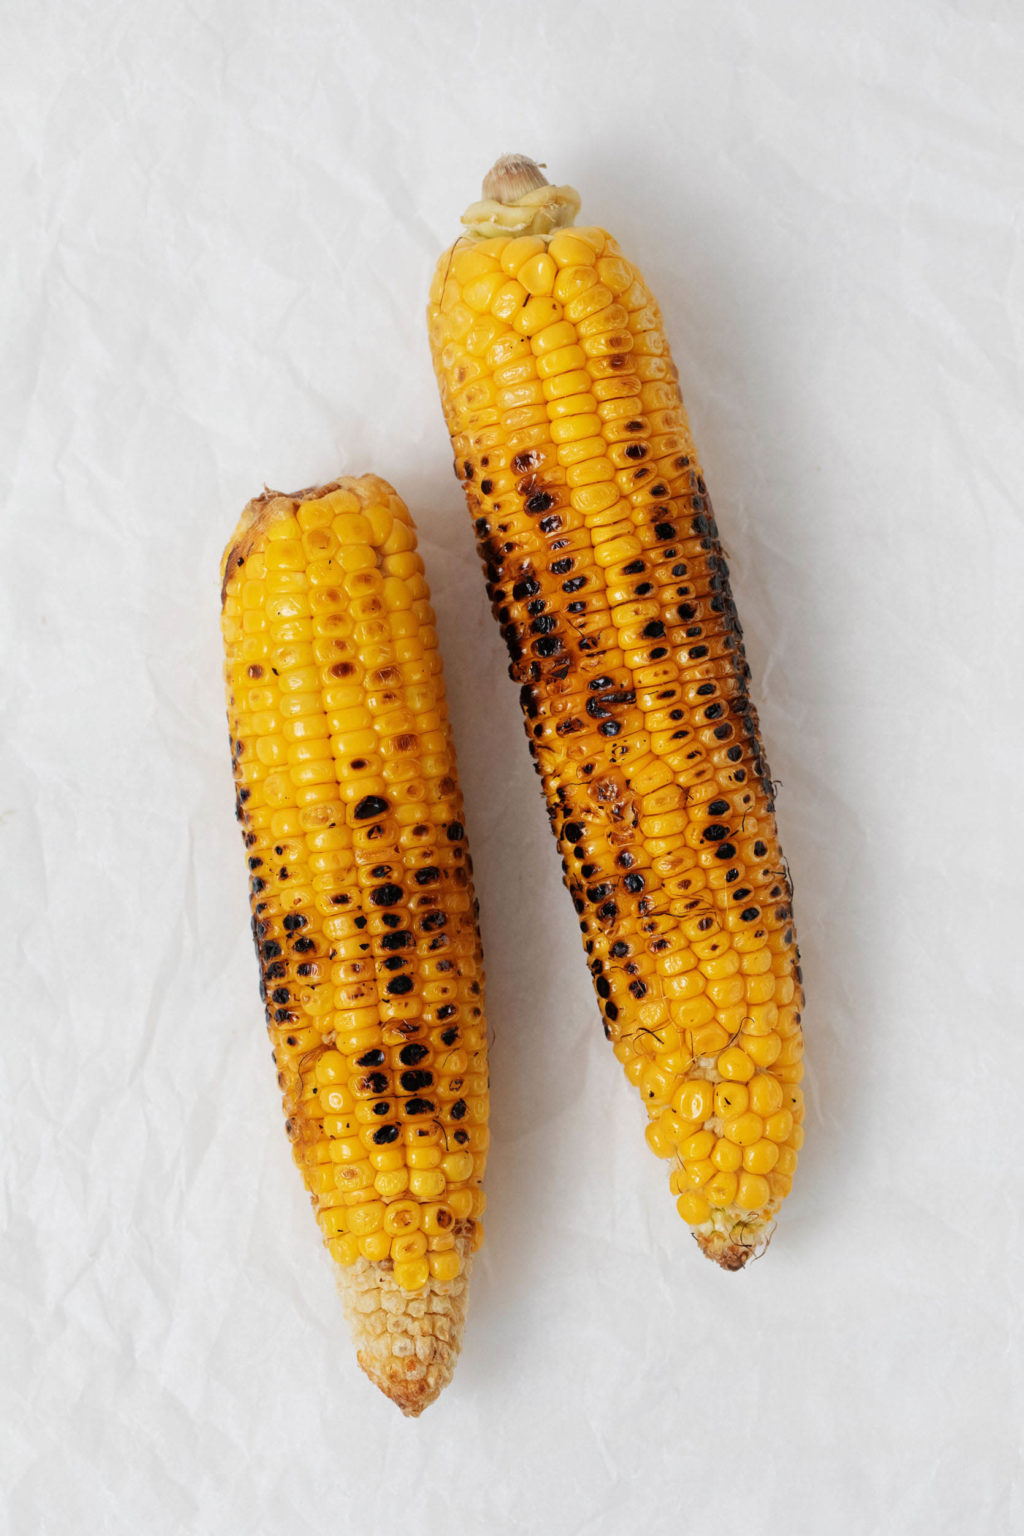 Two ears of grilled corn are resting on a sheet of parchment paper.